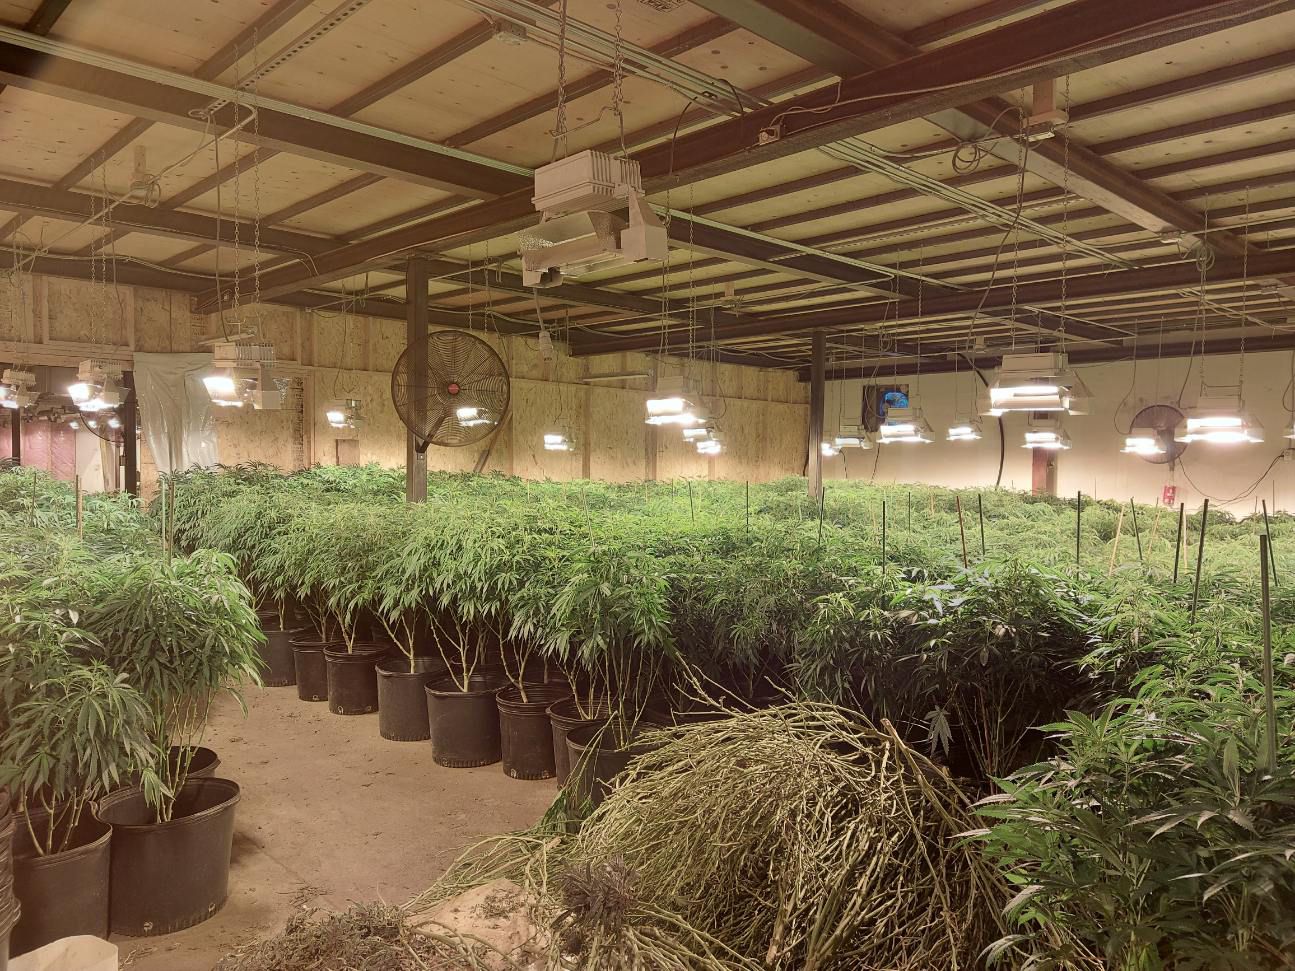 More than $5M in cannabis seized from Kearney grow-op